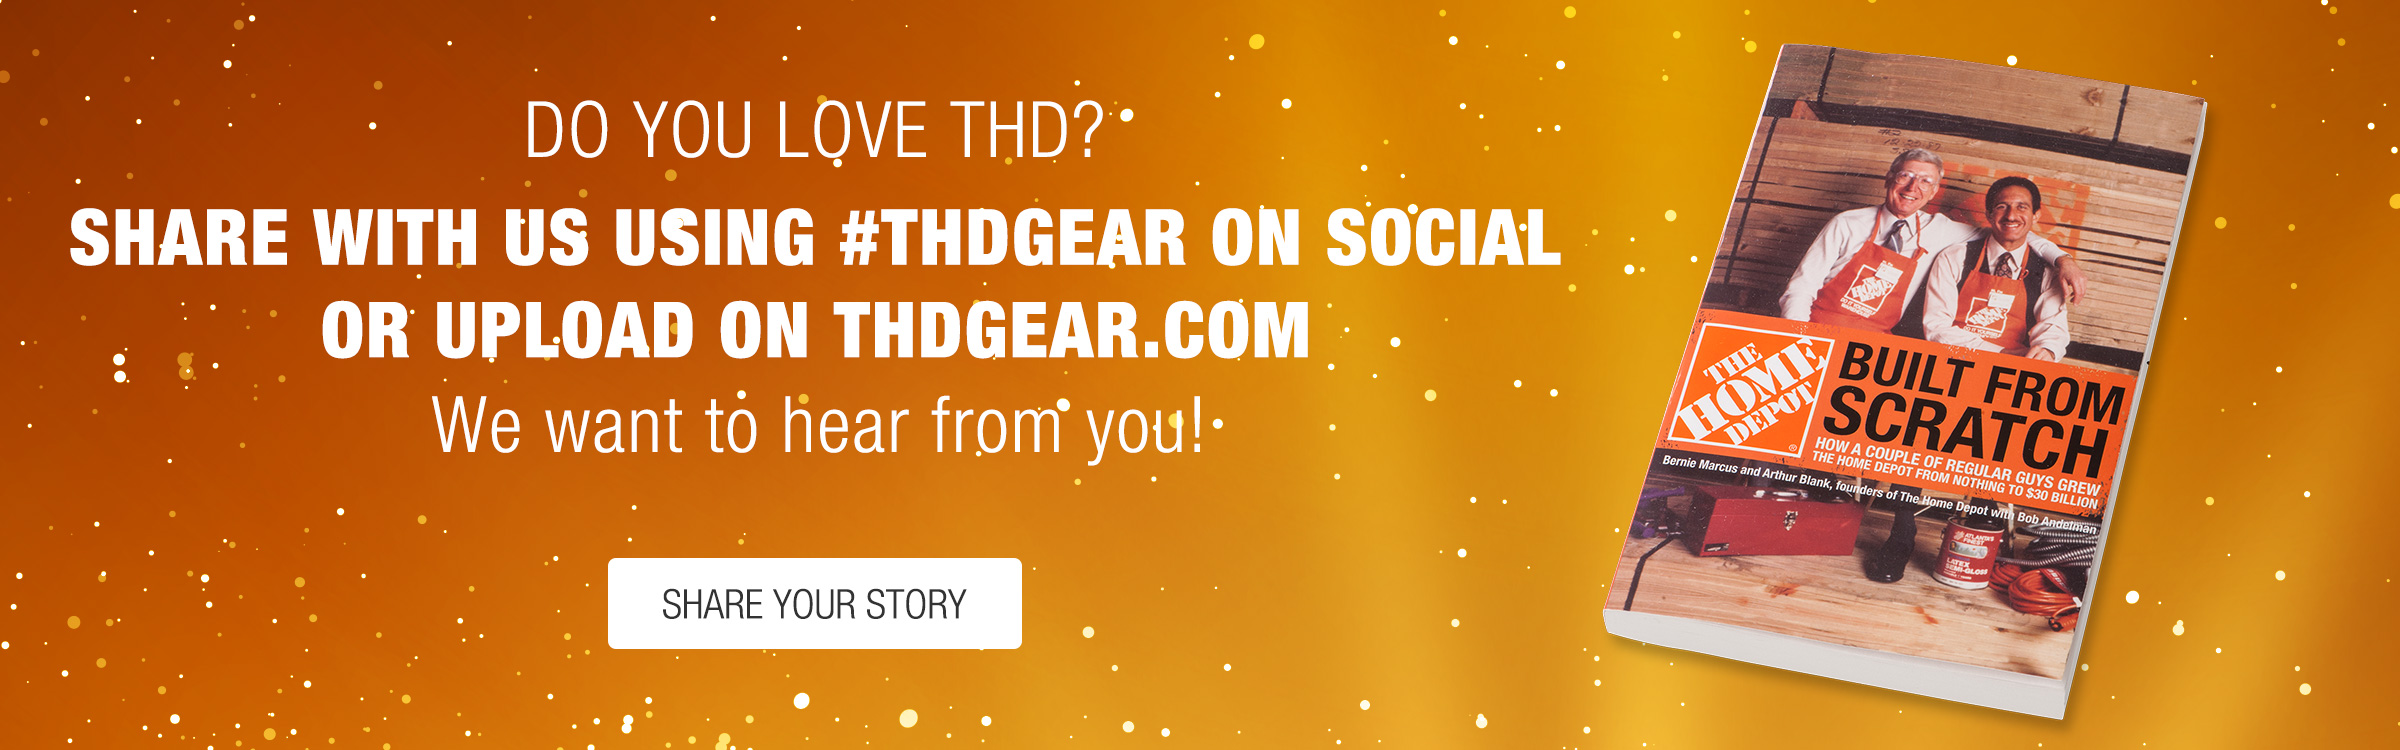 share your story with thdgear on social media hashtag thdgear